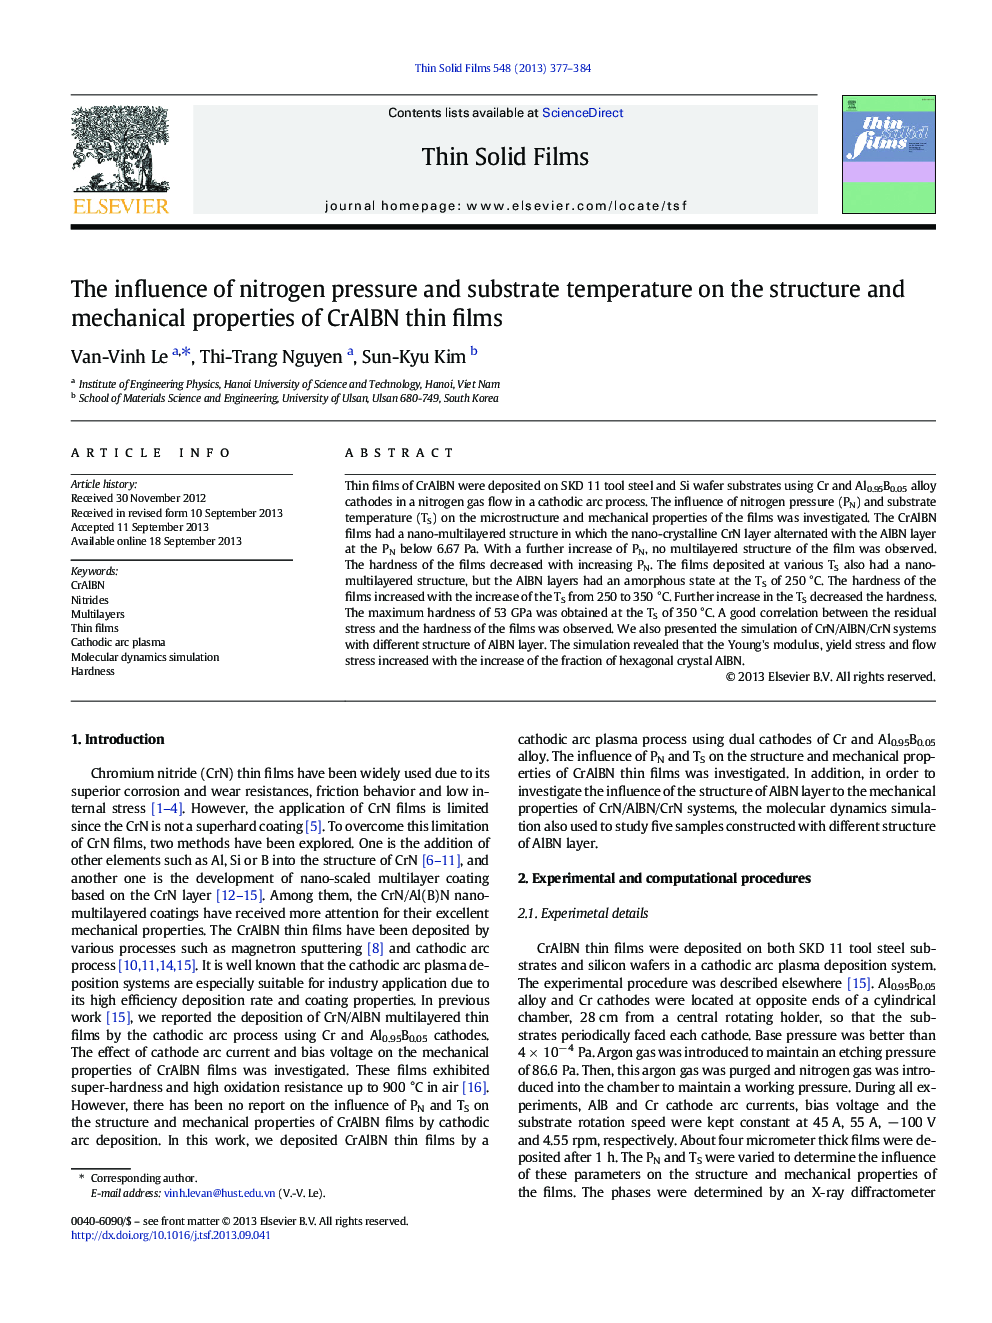 The influence of nitrogen pressure and substrate temperature on the structure and mechanical properties of CrAlBN thin films